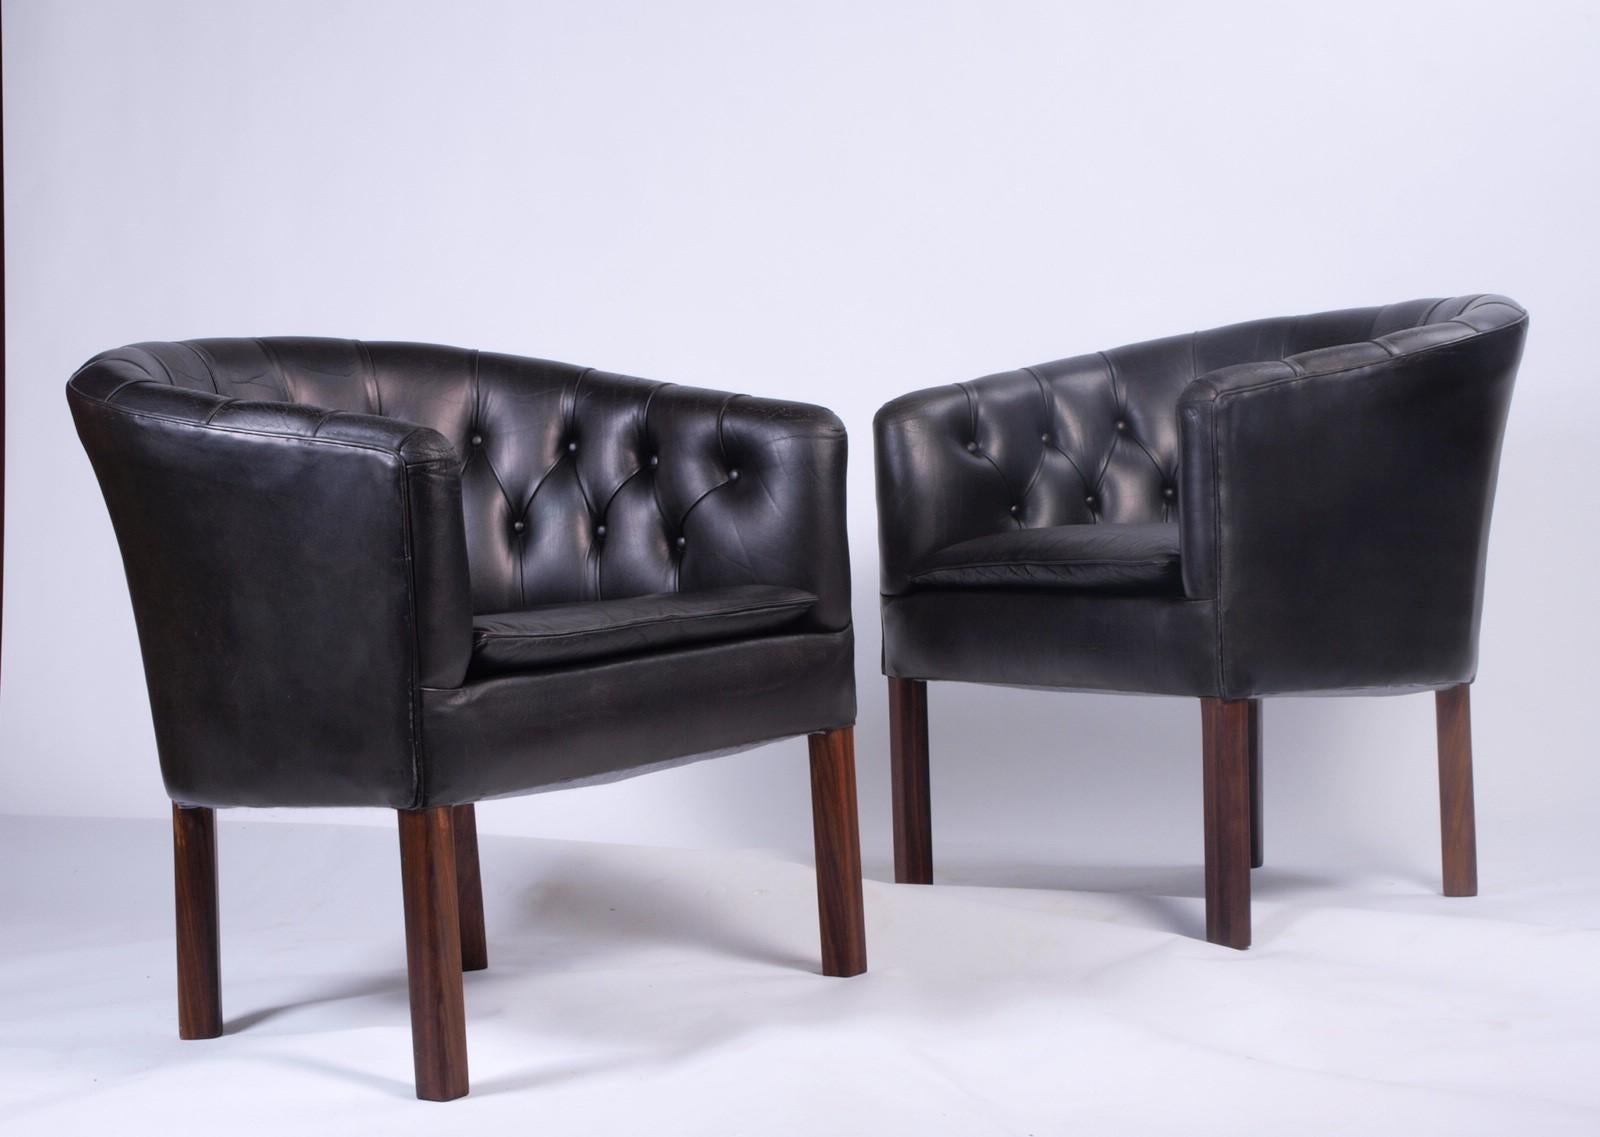 Leather Danish Lounge Chairs Attributed to Kaare Klint, Borge Mogensen 1